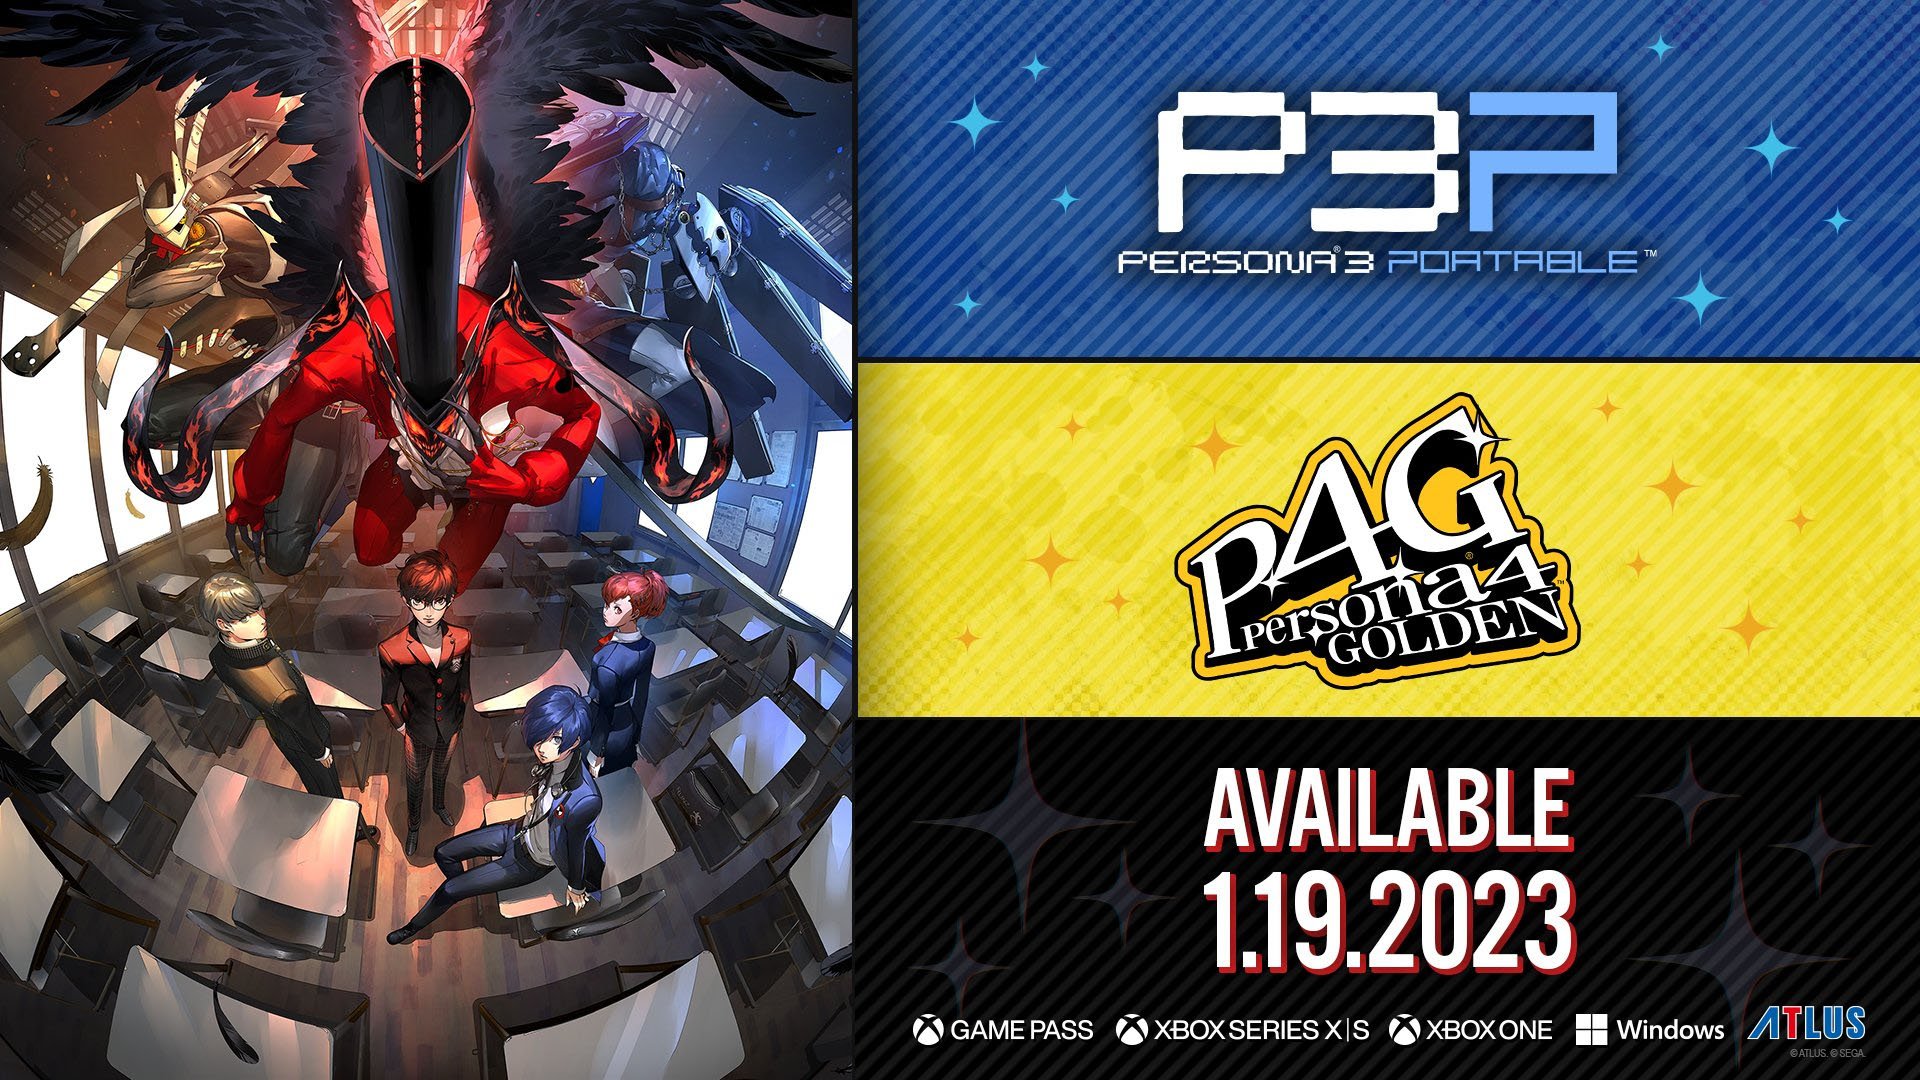 #
      Persona 3 Portable and Persona 4 Golden for Xbox Series, PS4, Xbox One, Switch, and PC launch January 19, 2023